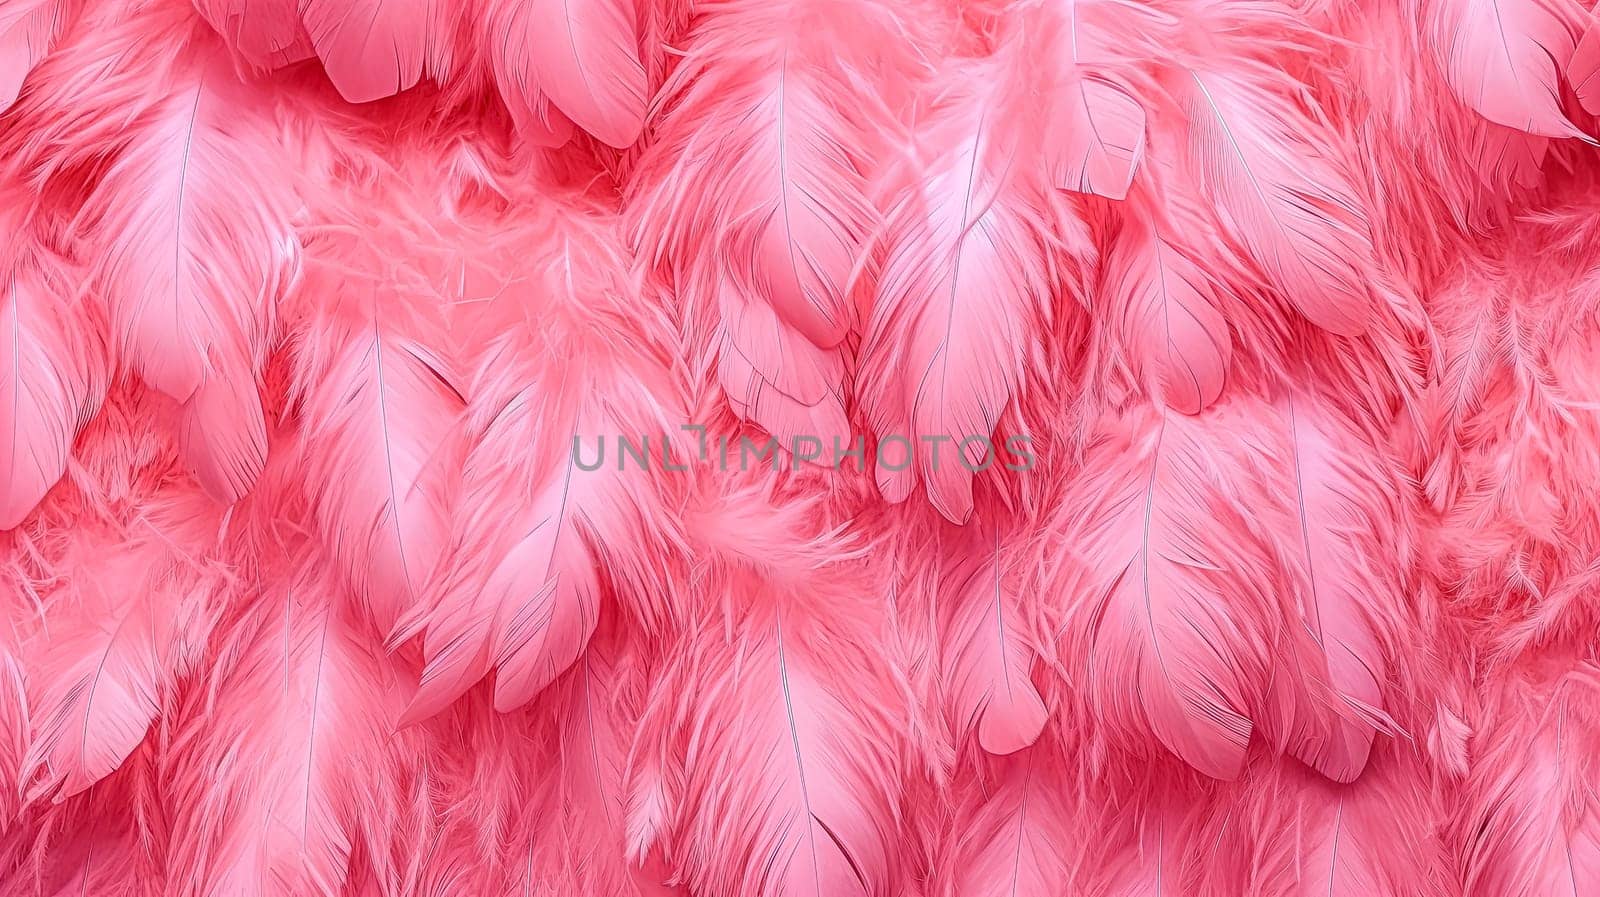 A close up of pink feathers with a pink background. The feathers are arranged in a way that creates a sense of movement and flow